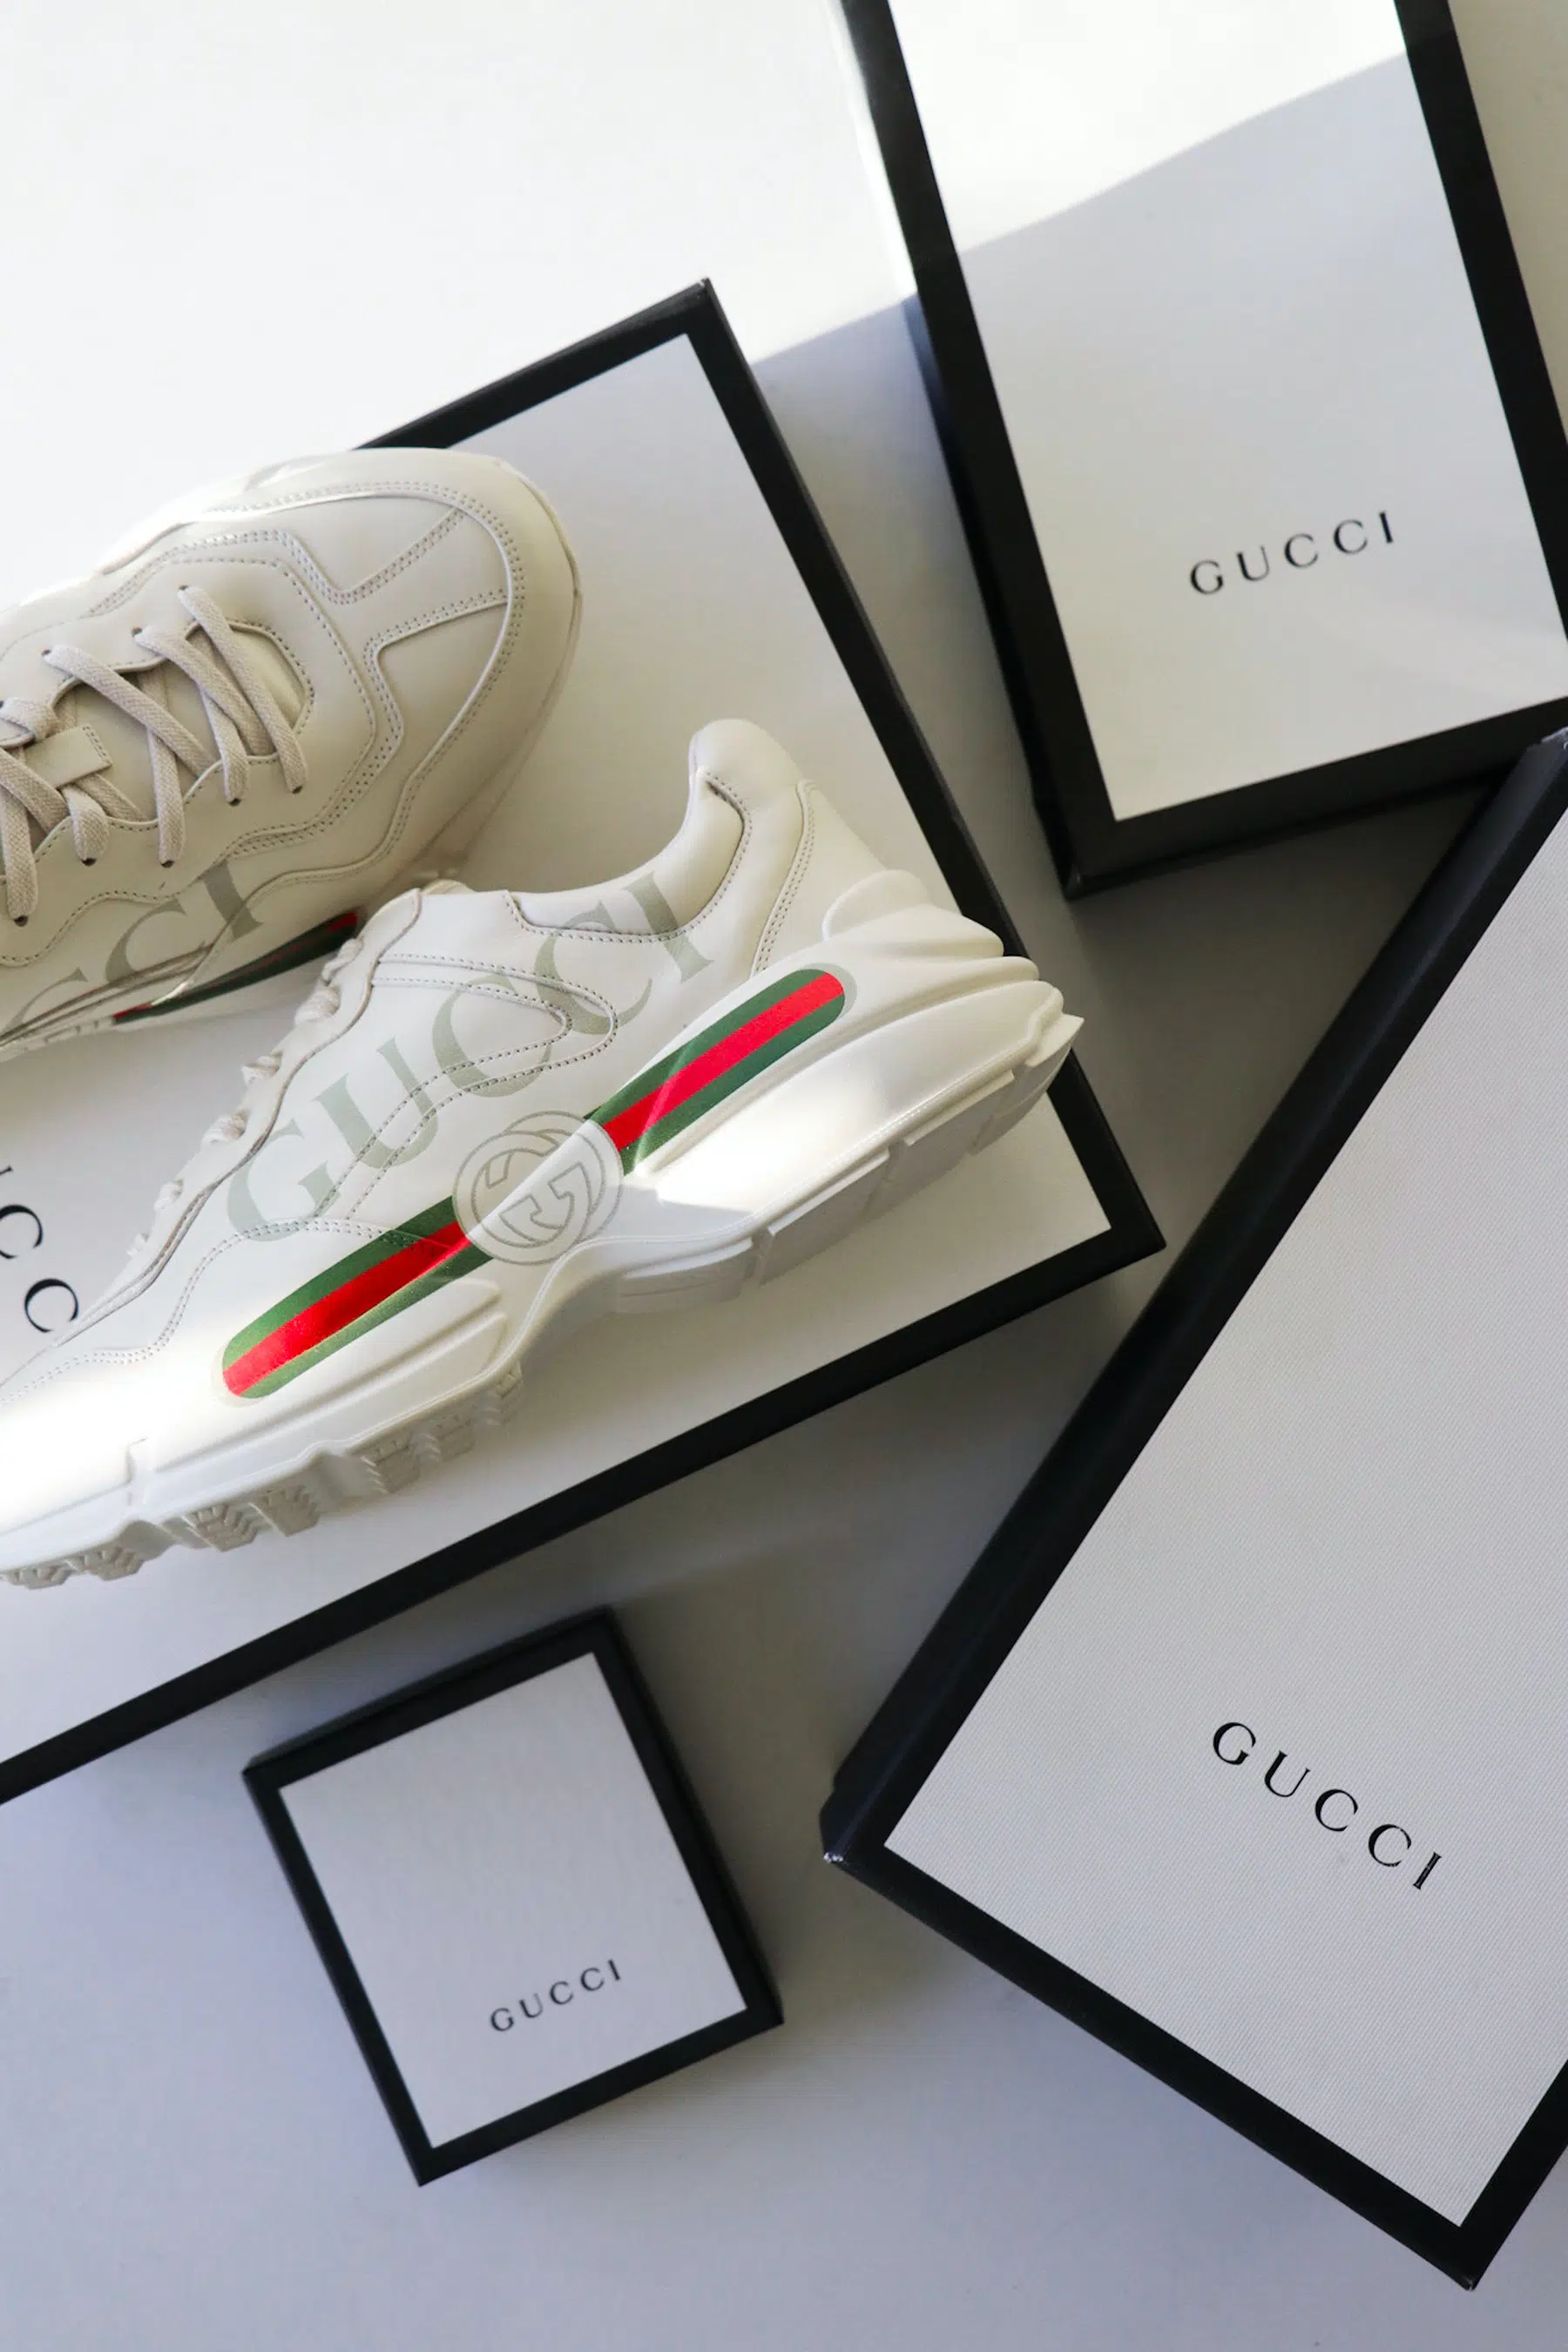 Top five Gucci dupes, by fashion blogger What The Fab